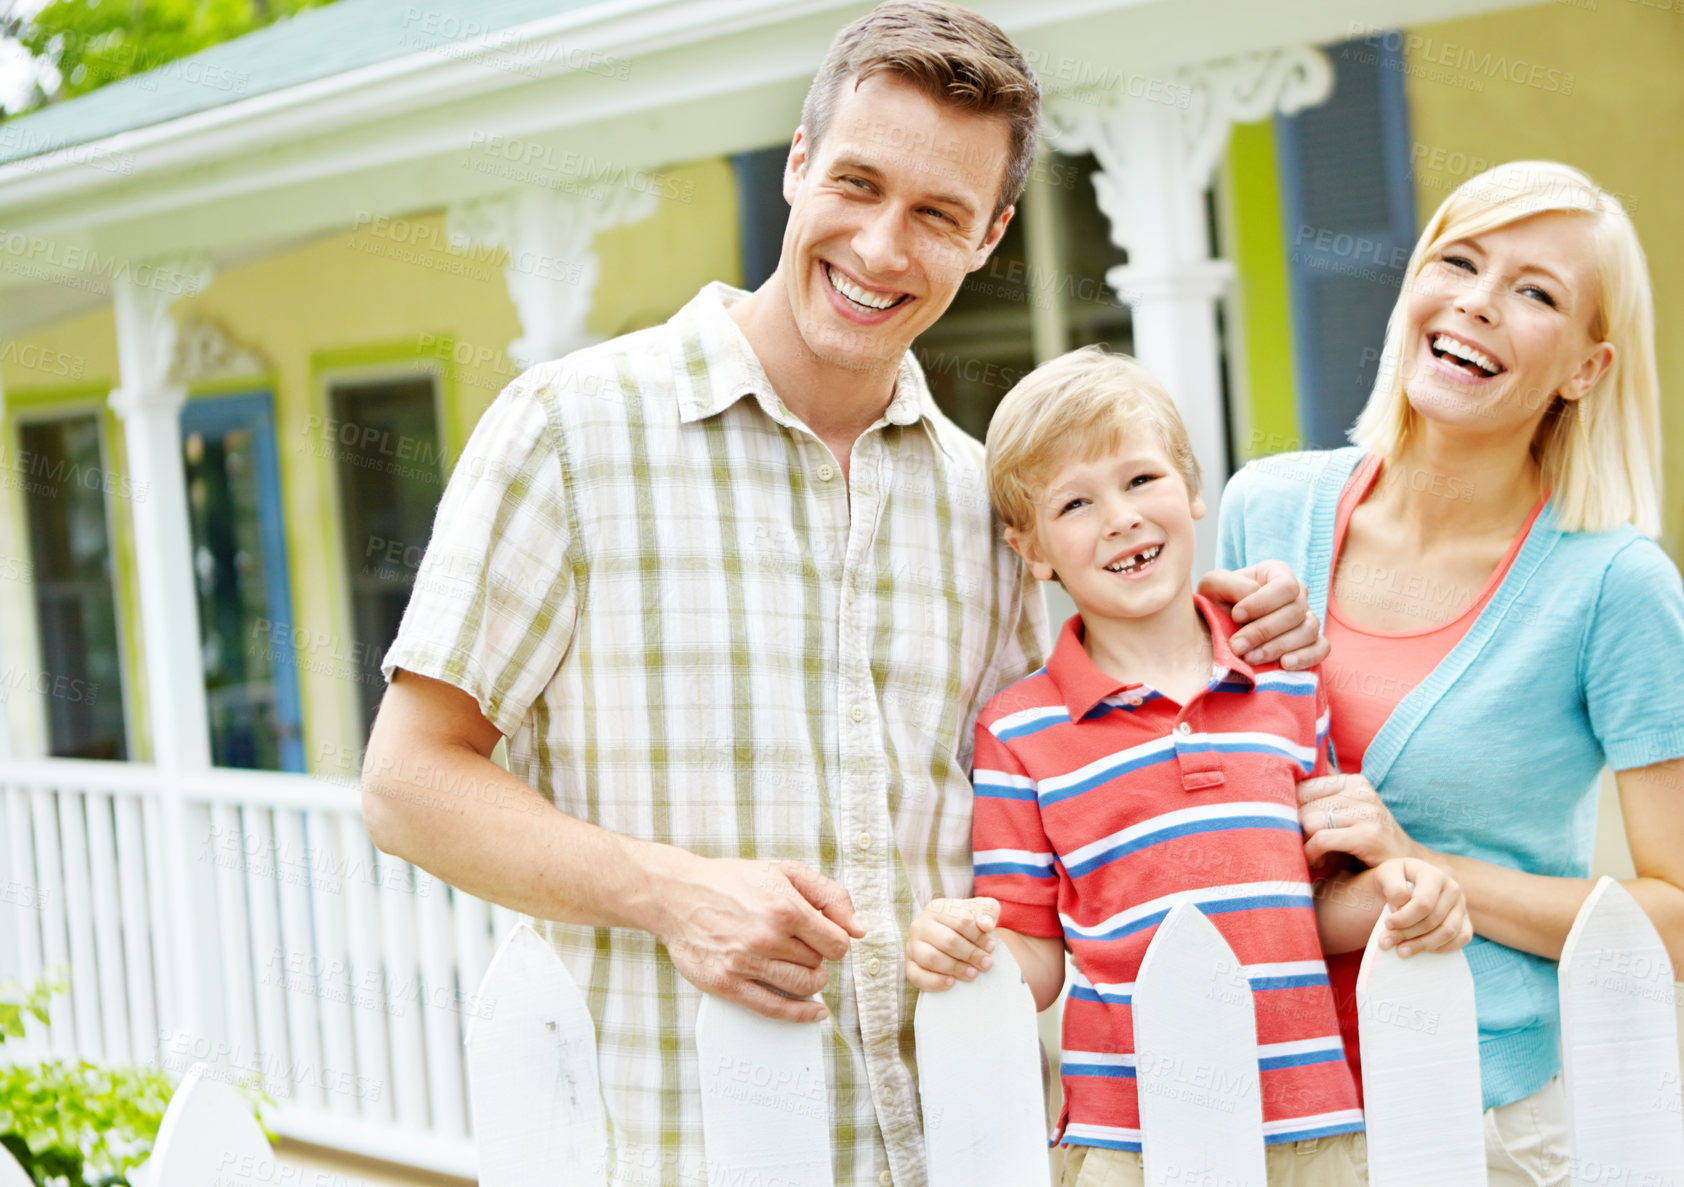 Buy stock photo Happy young family standing together outdoors